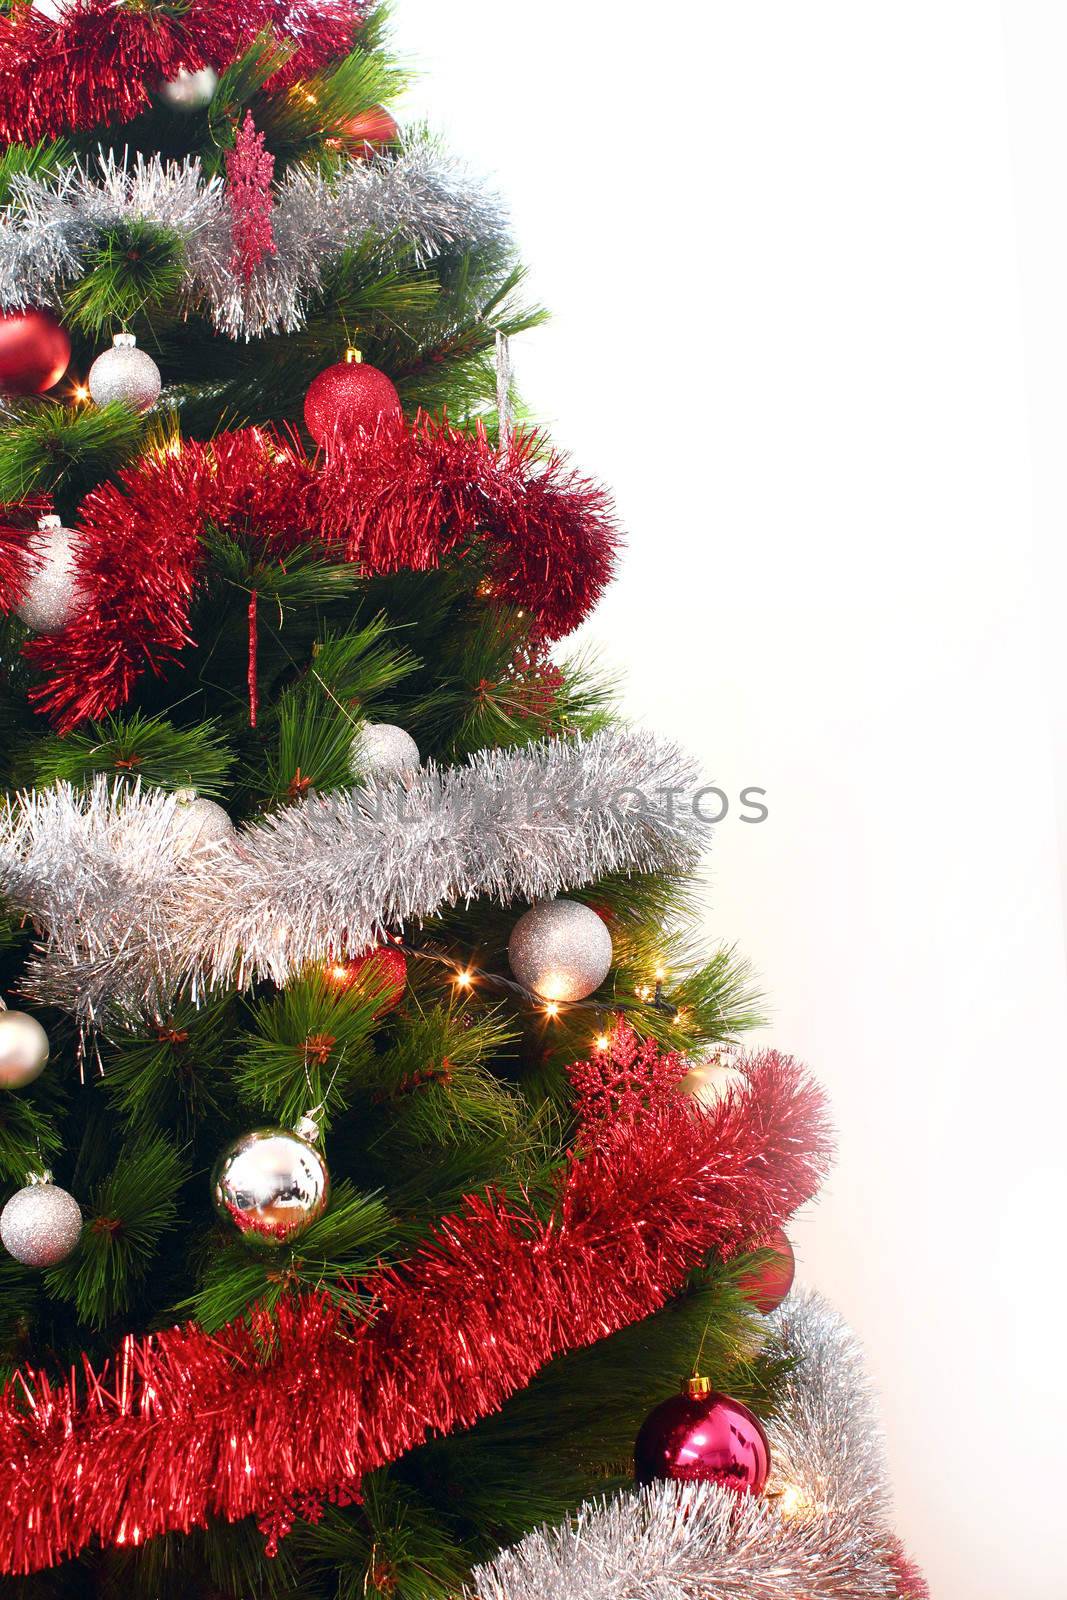 Christmas tree with decorative elements on white background